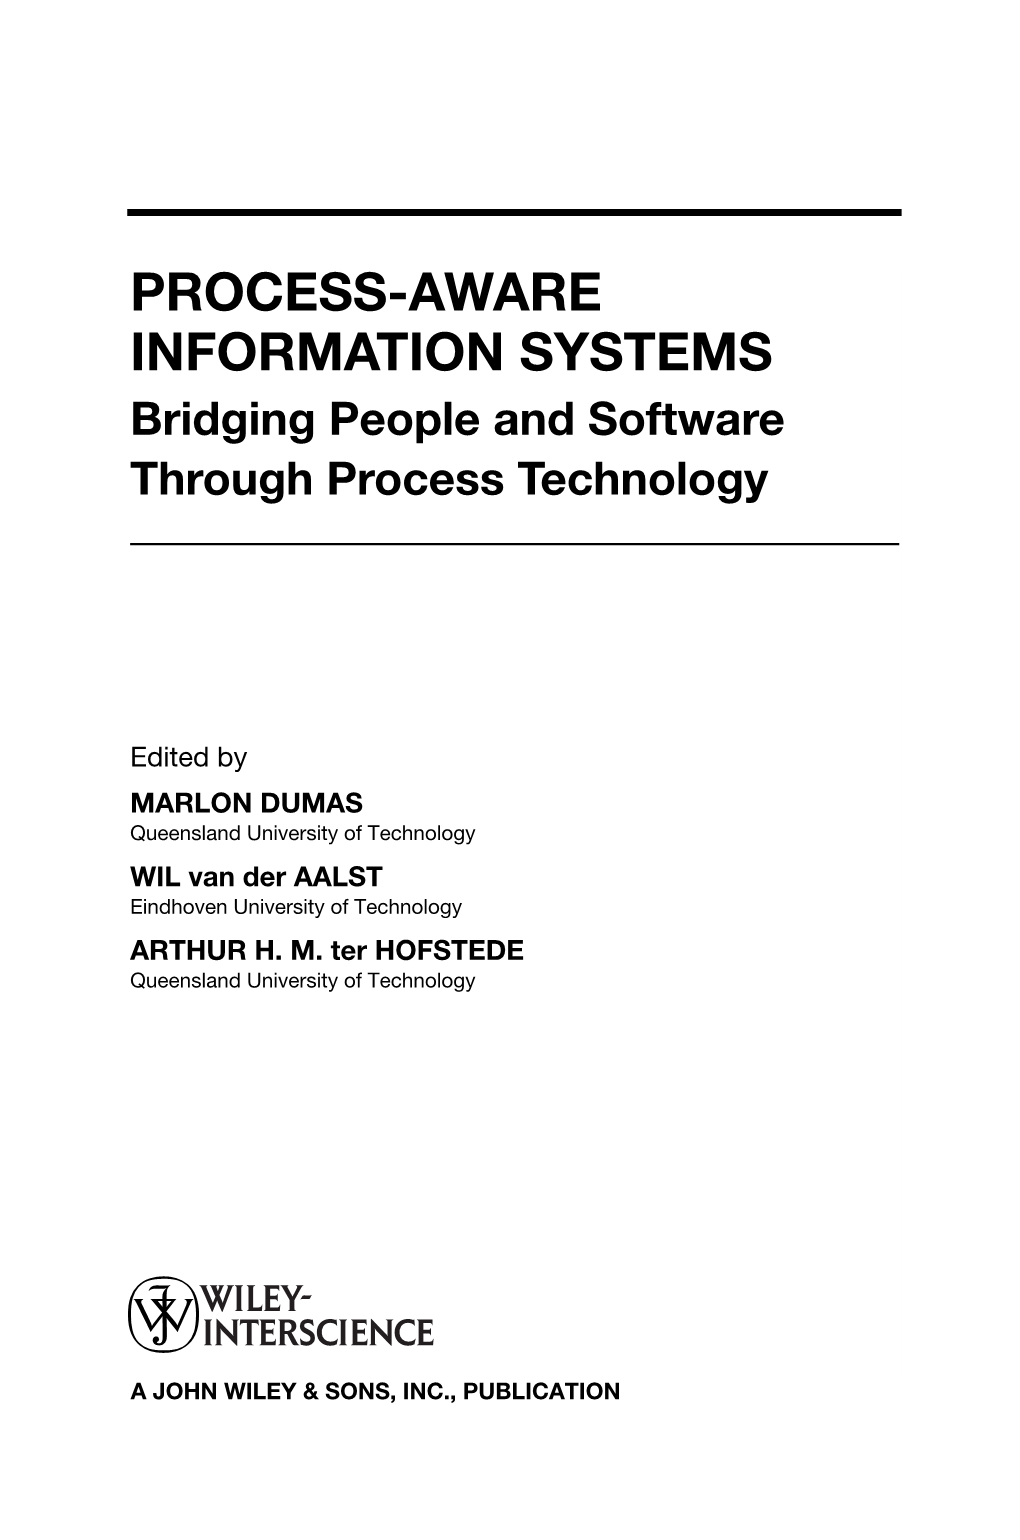 PROCESS-AWARE INFORMATION SYSTEMS Bridging People and Software Through Process Technology